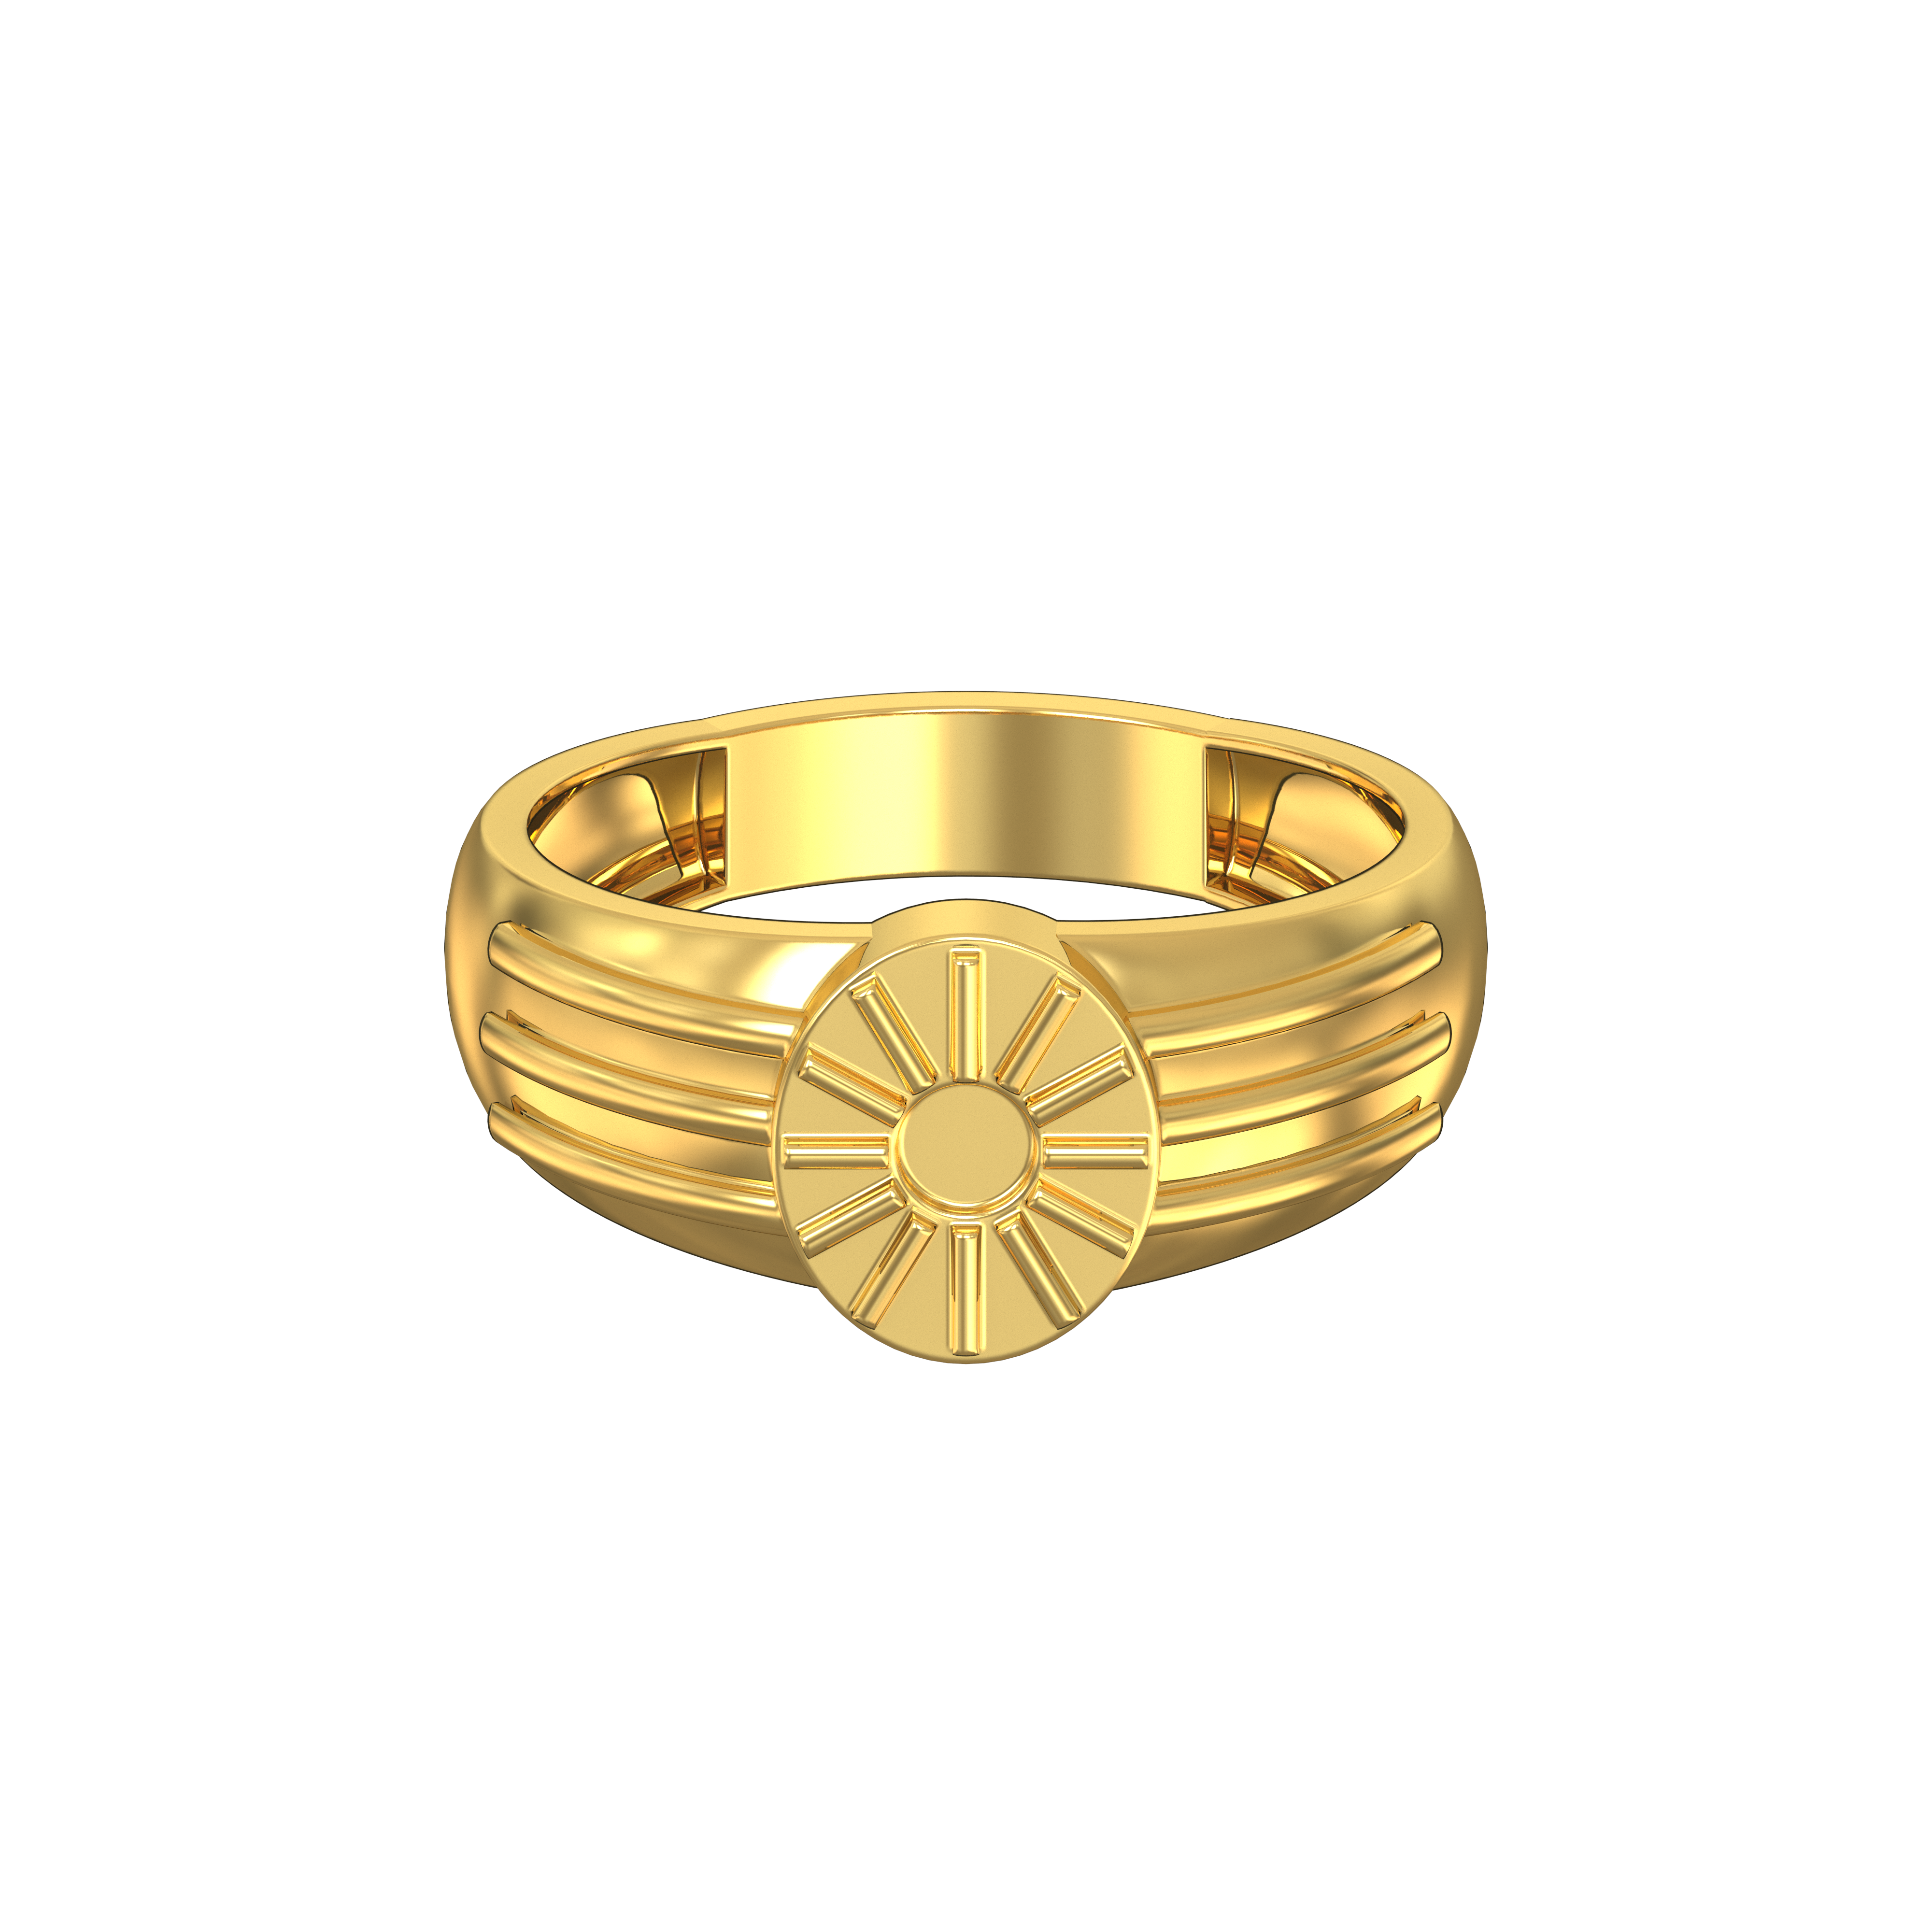 LATEST GOLD RING DESIGNS FOR MEN WITH WEIGHT | Gold ring designs, Latest gold  ring designs, Mens ring designs